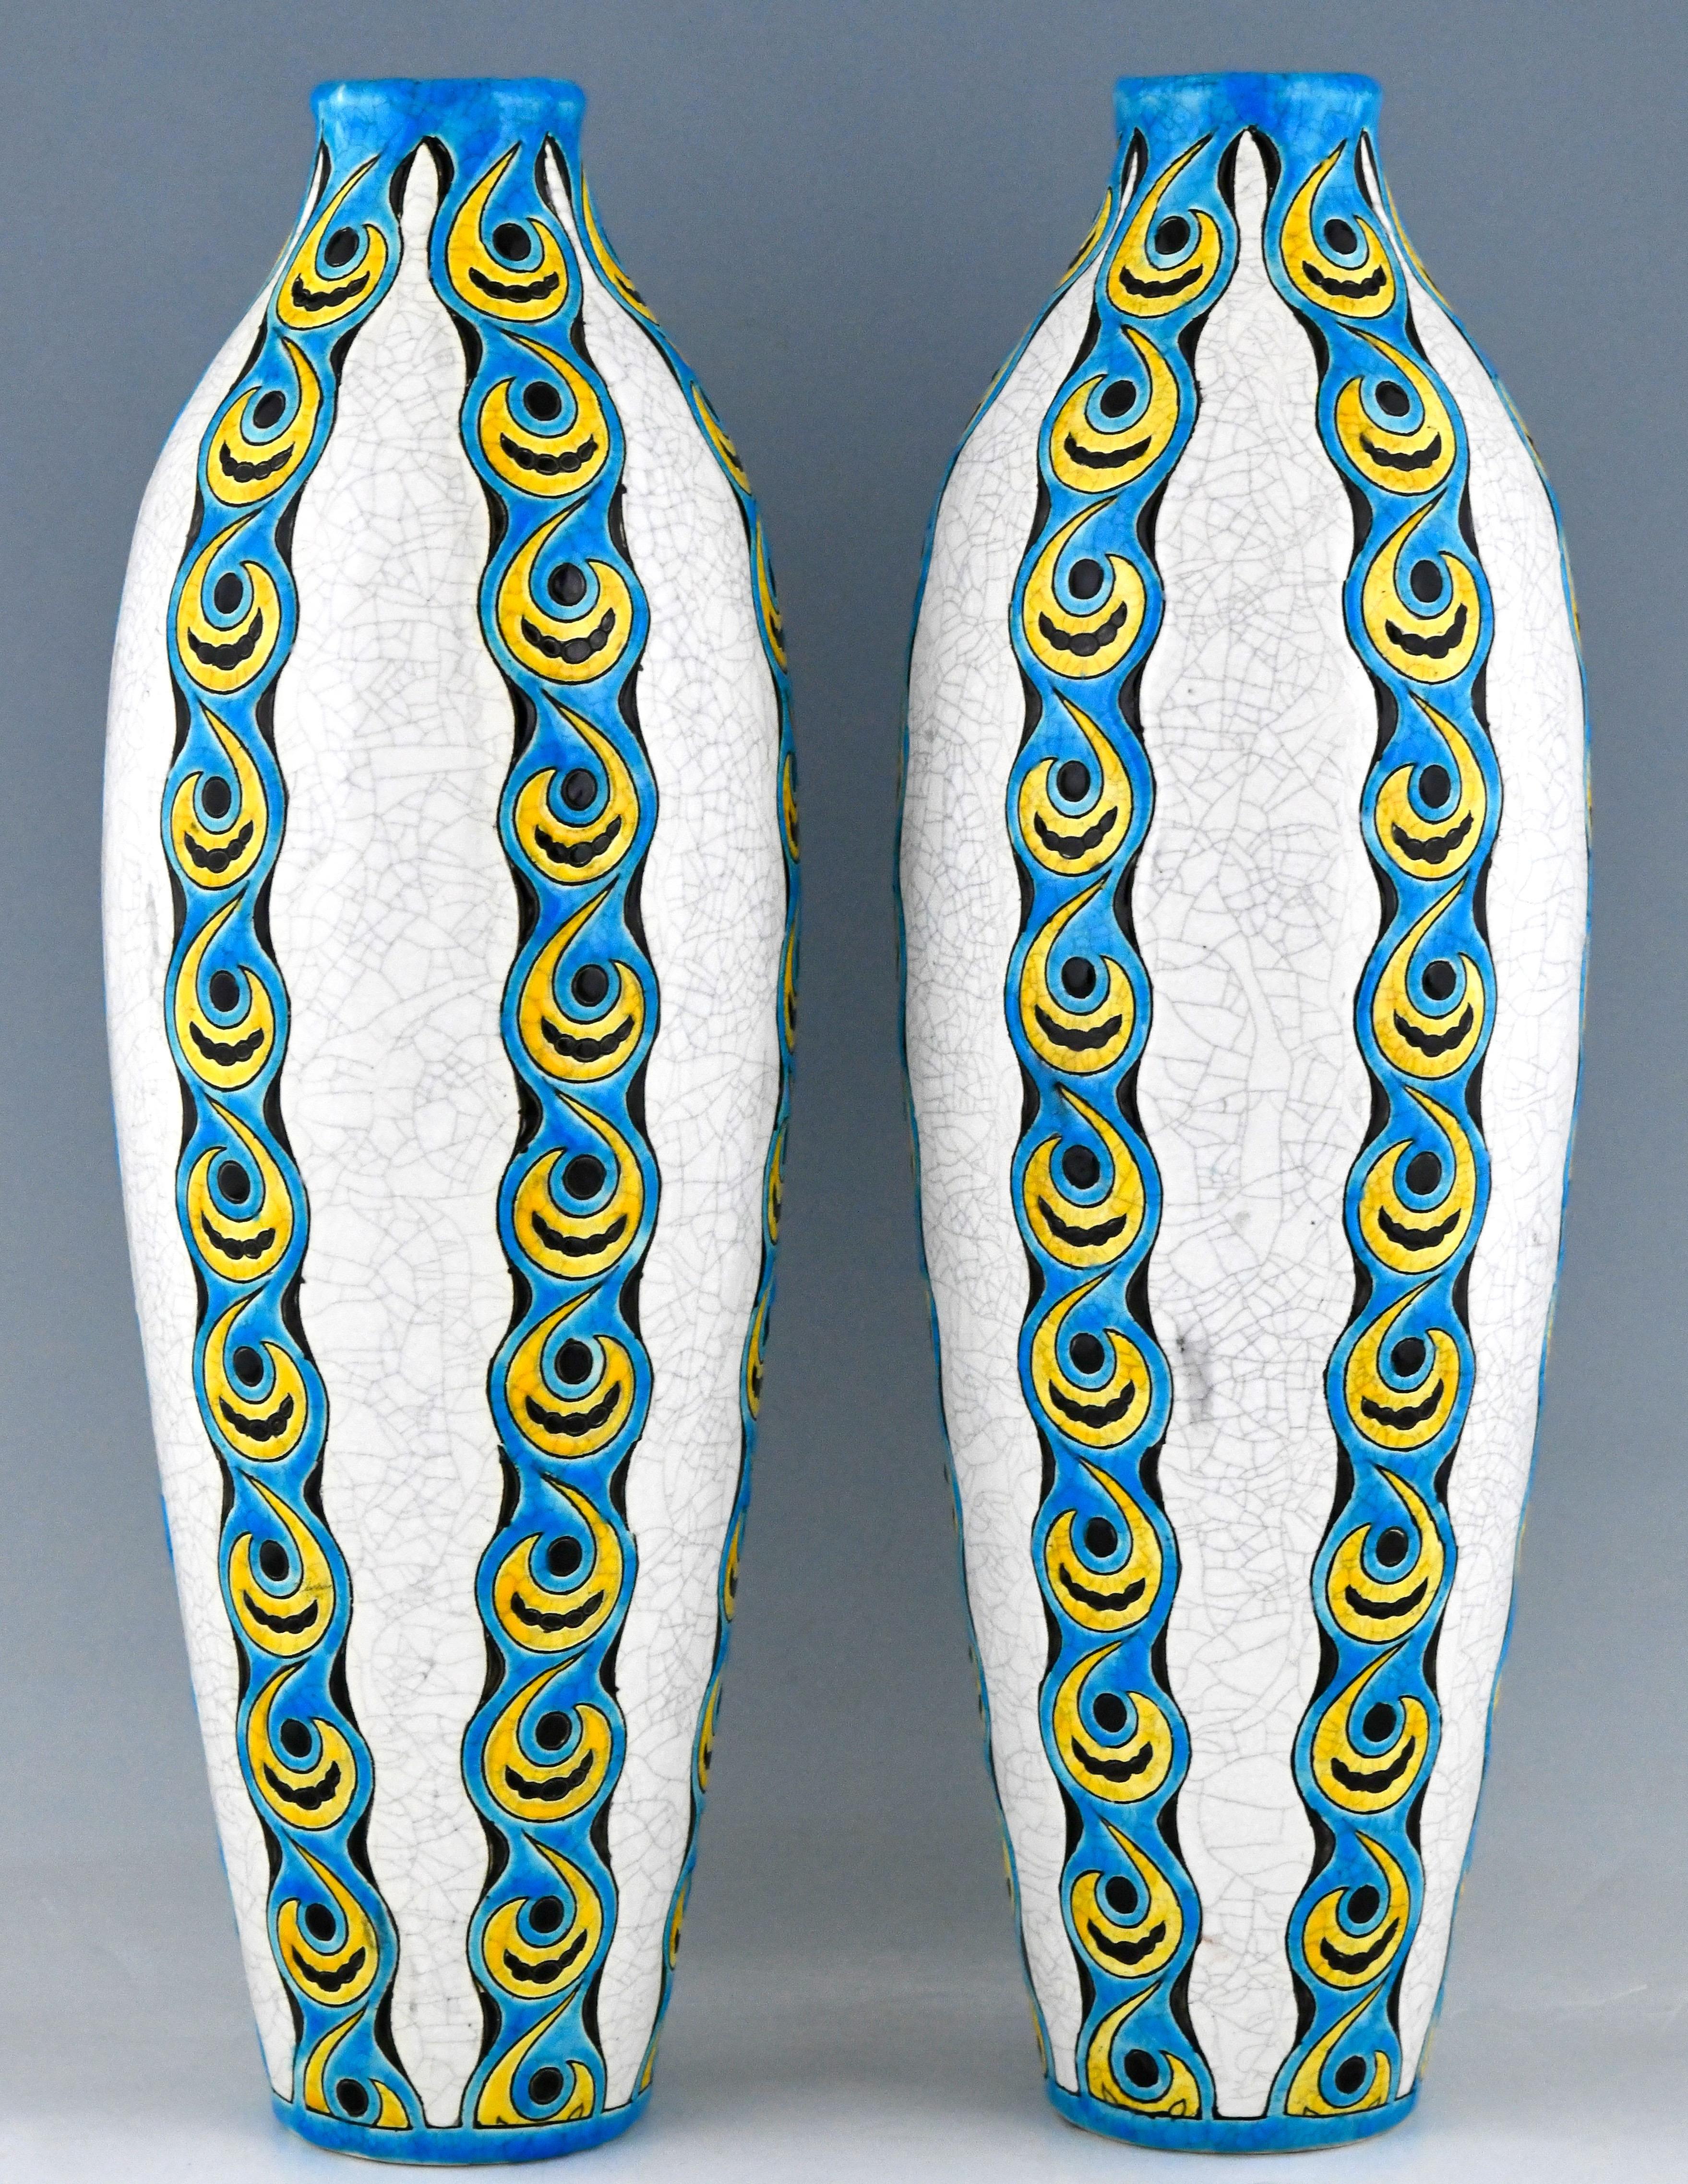 Belgian Tall Pair of Art Deco Craquelé Vases by Charles Catteau for Boch Frères